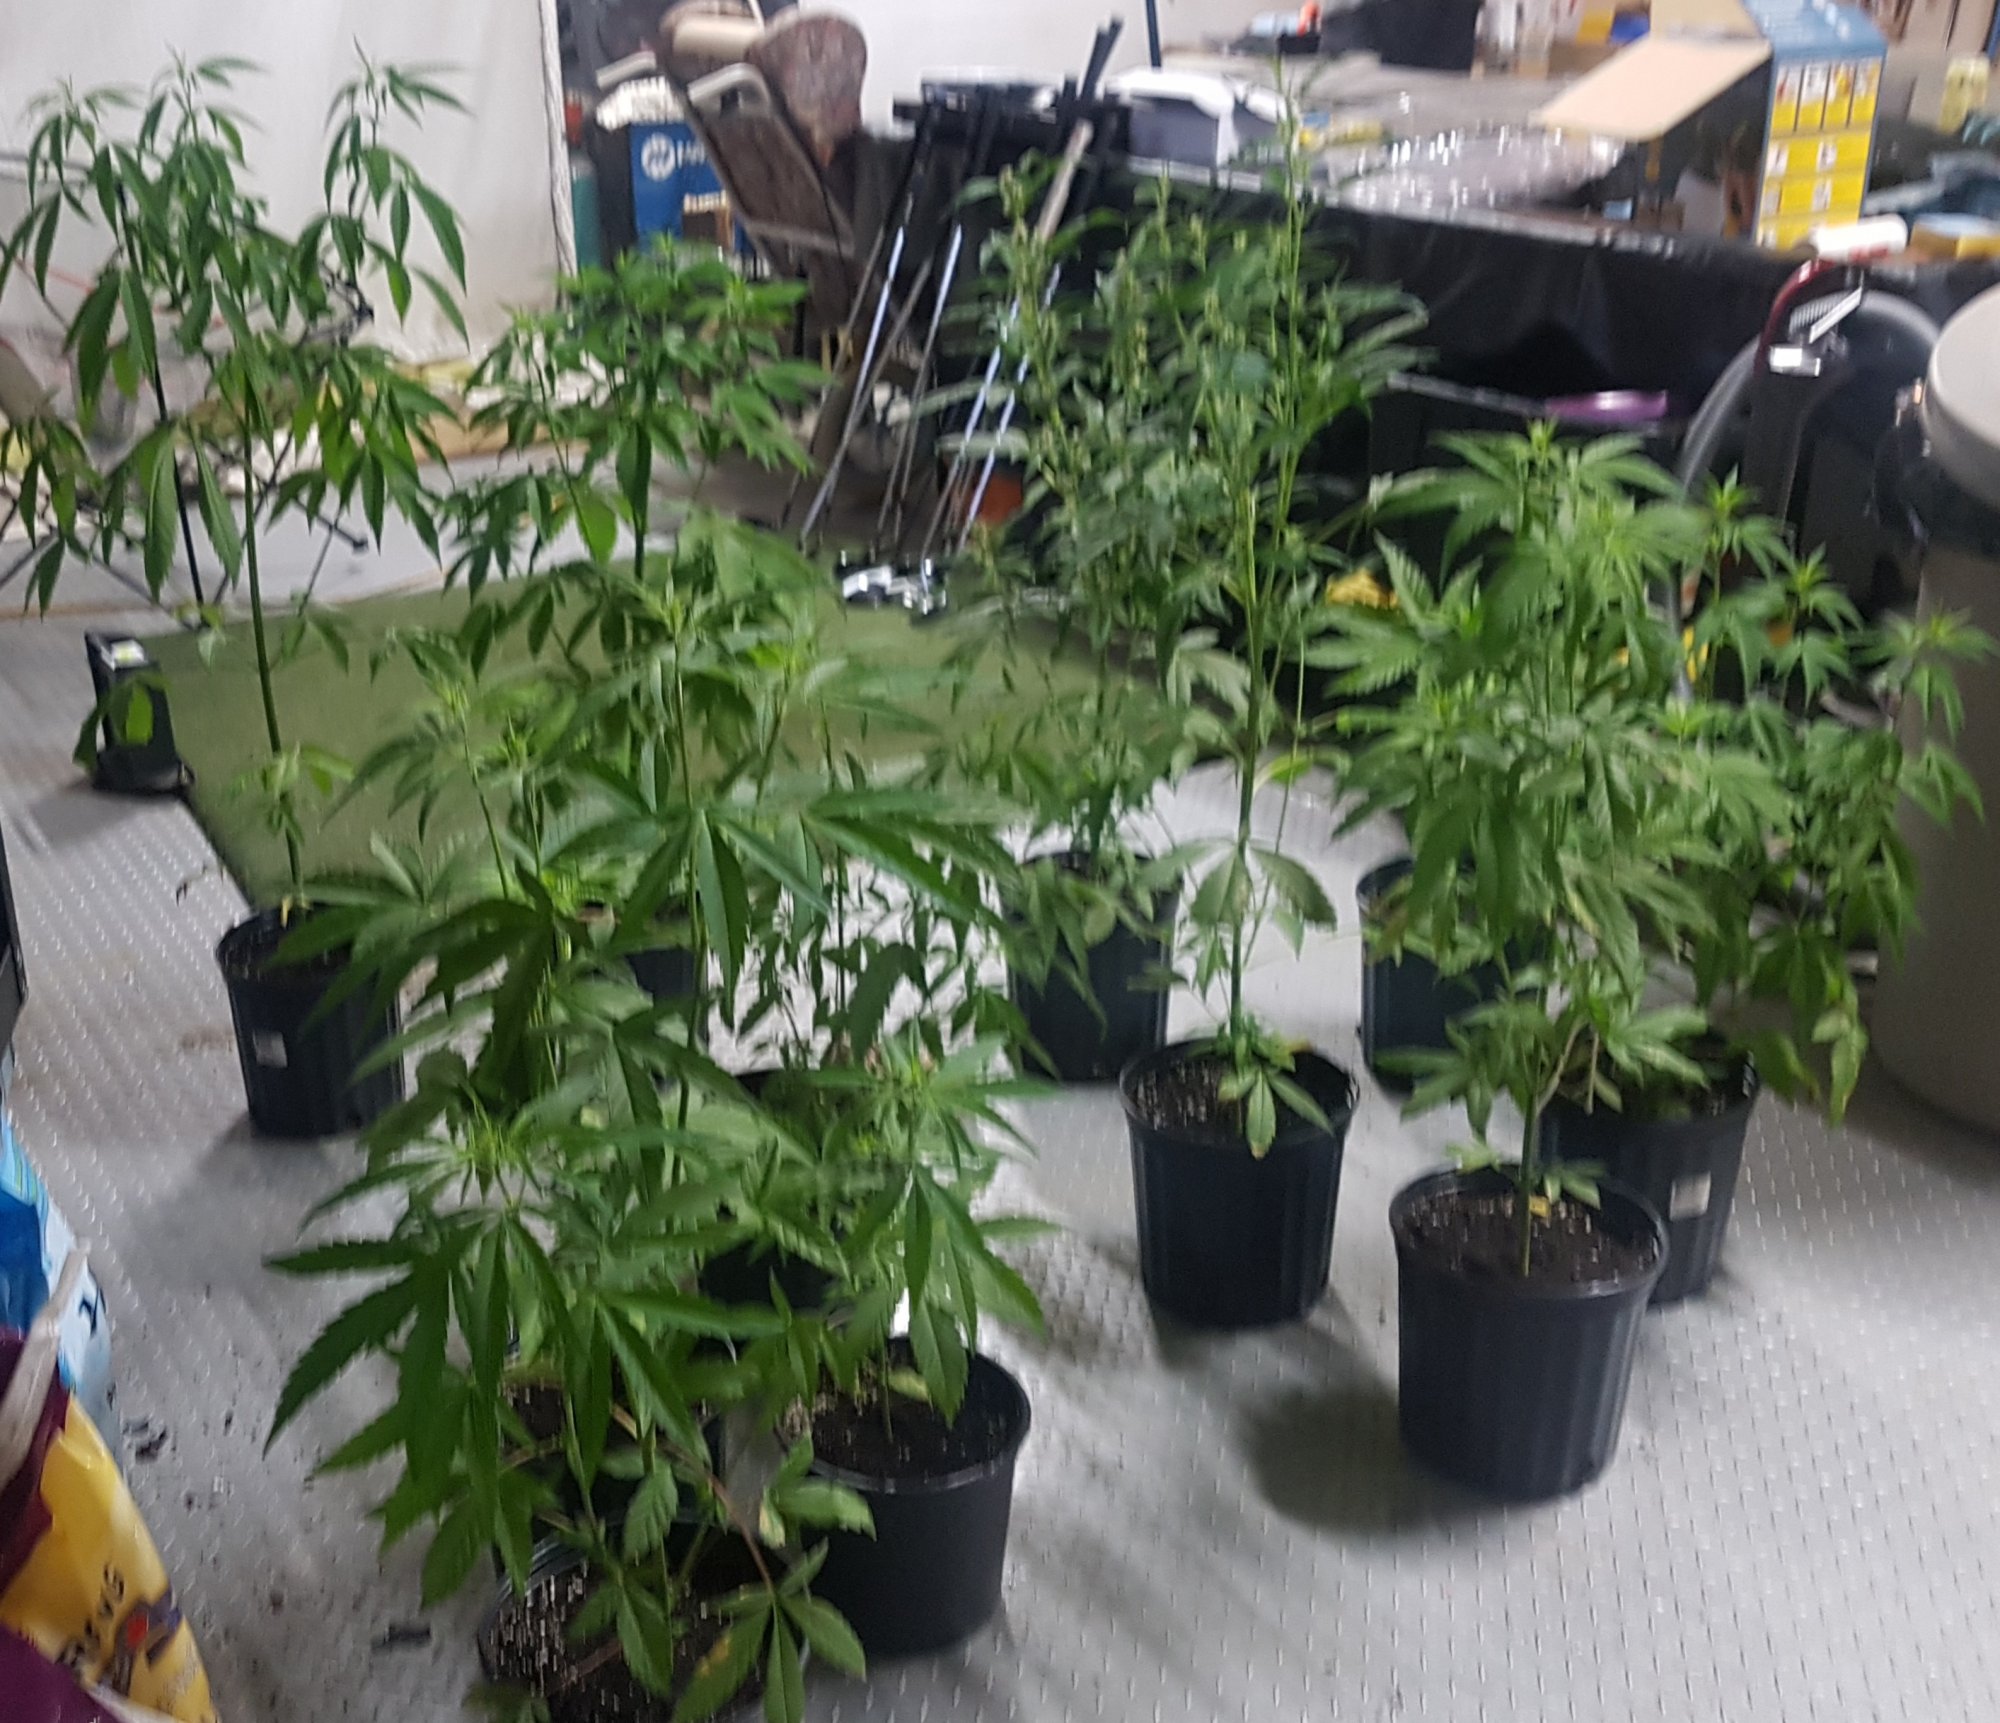 2nd year grow trying again